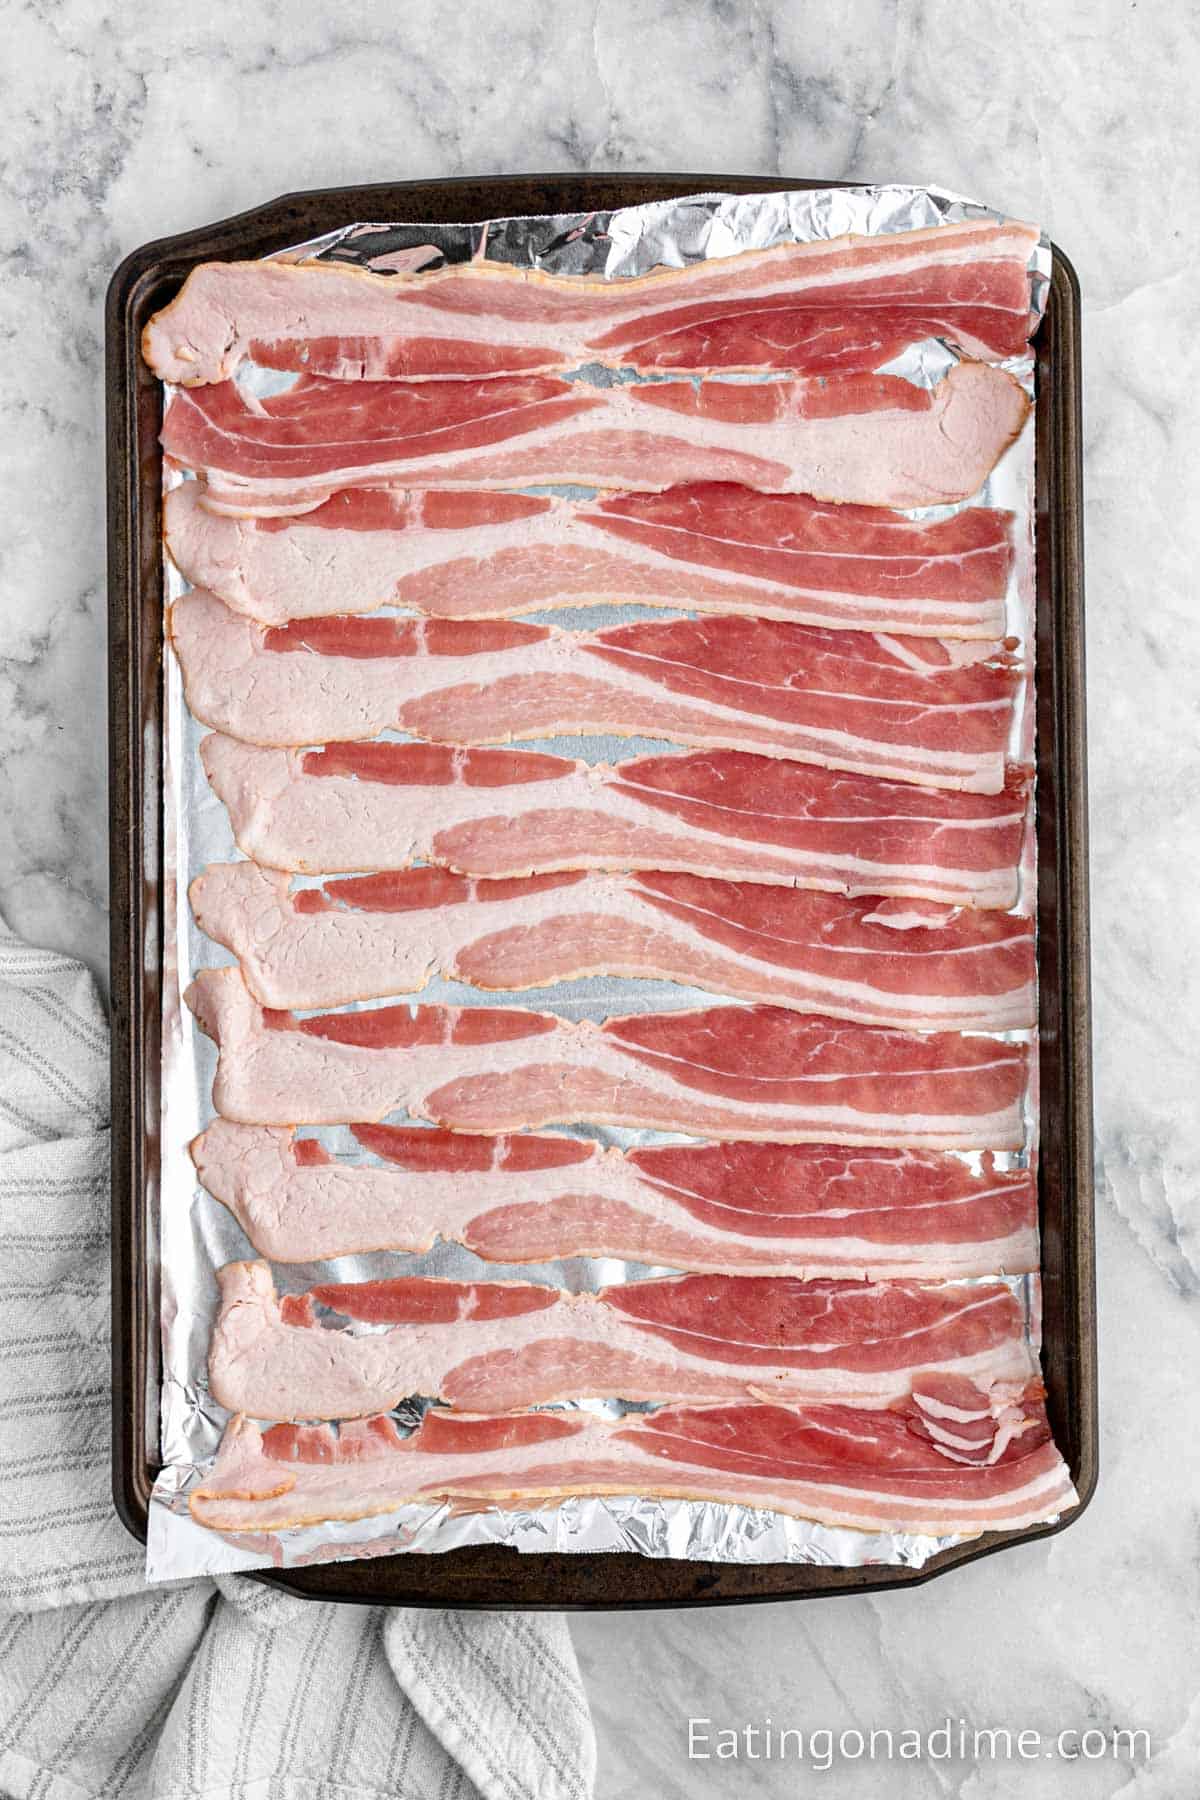 Cooking bacon on a baking sheet